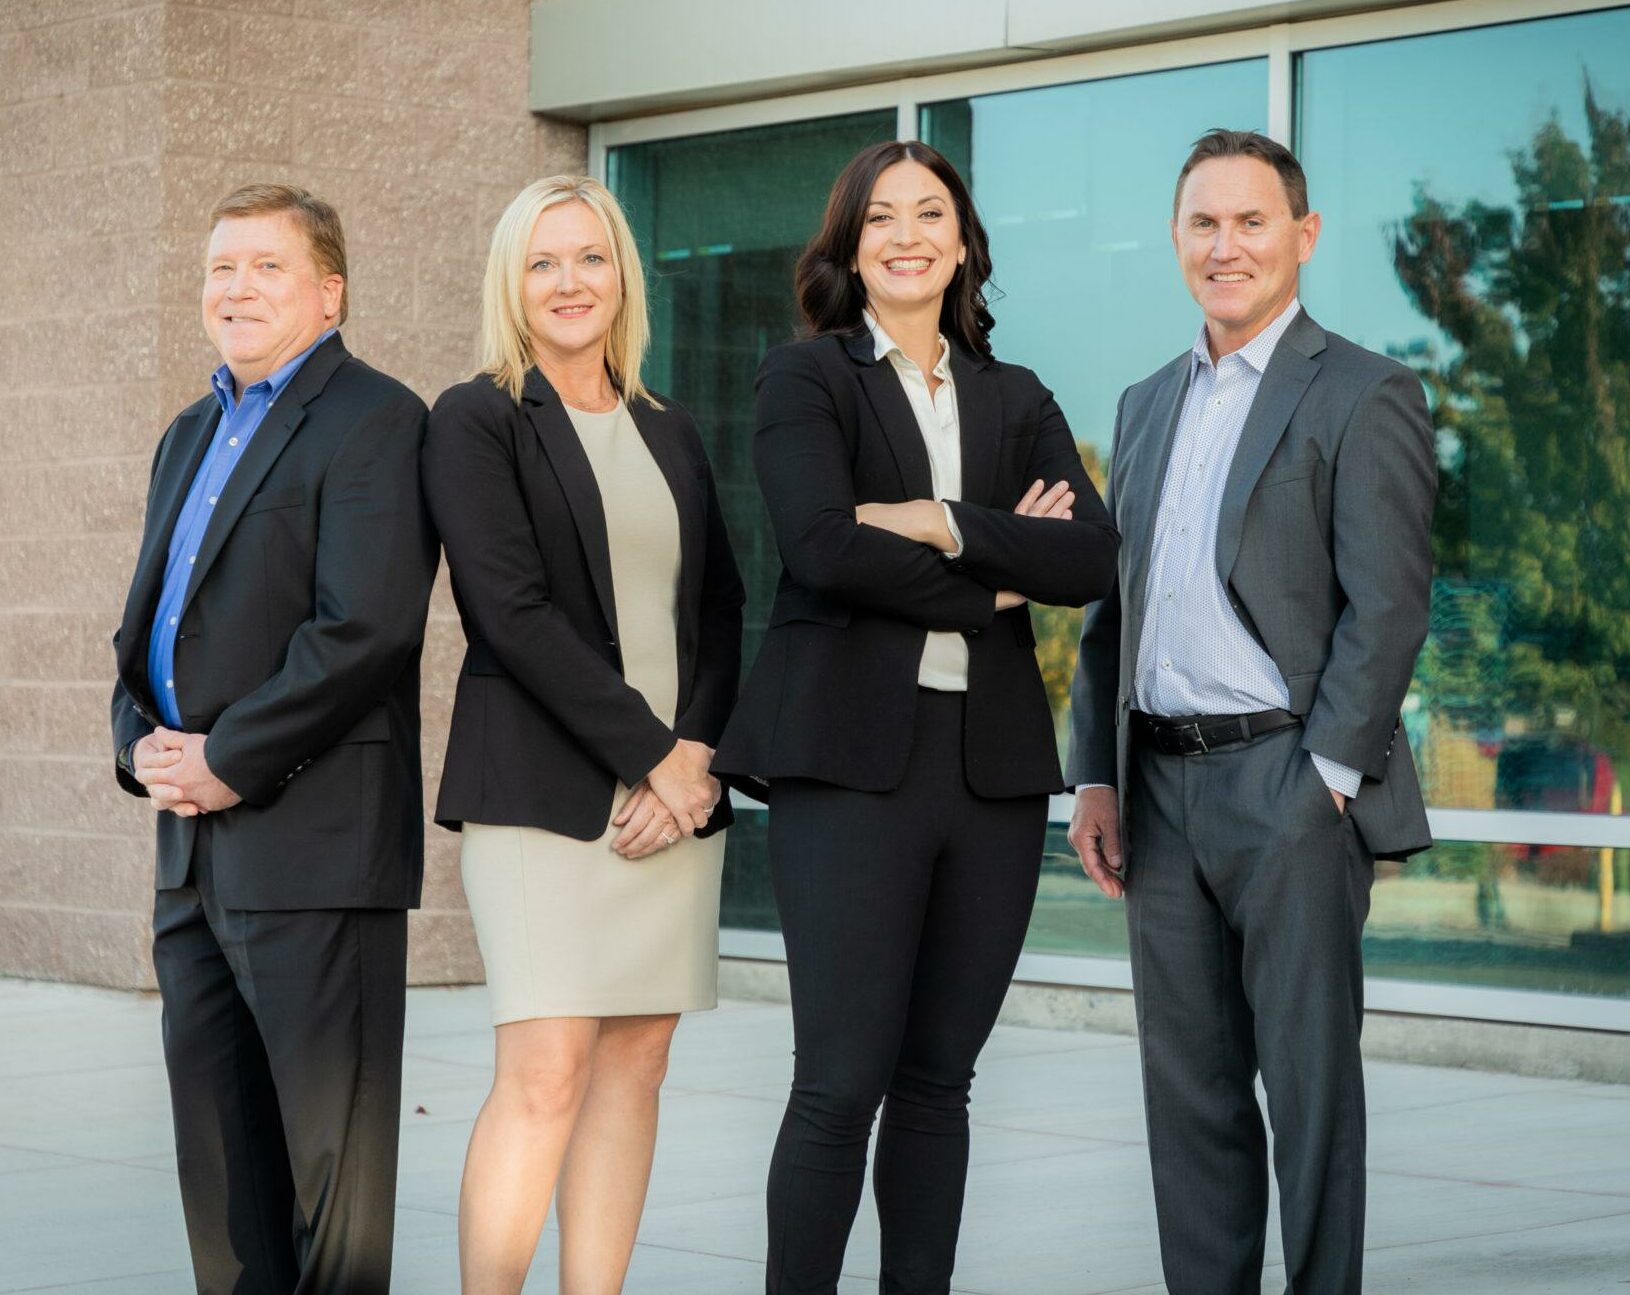 KHKSE: Attorneys at Law in Pasco, Kennewick & Richland